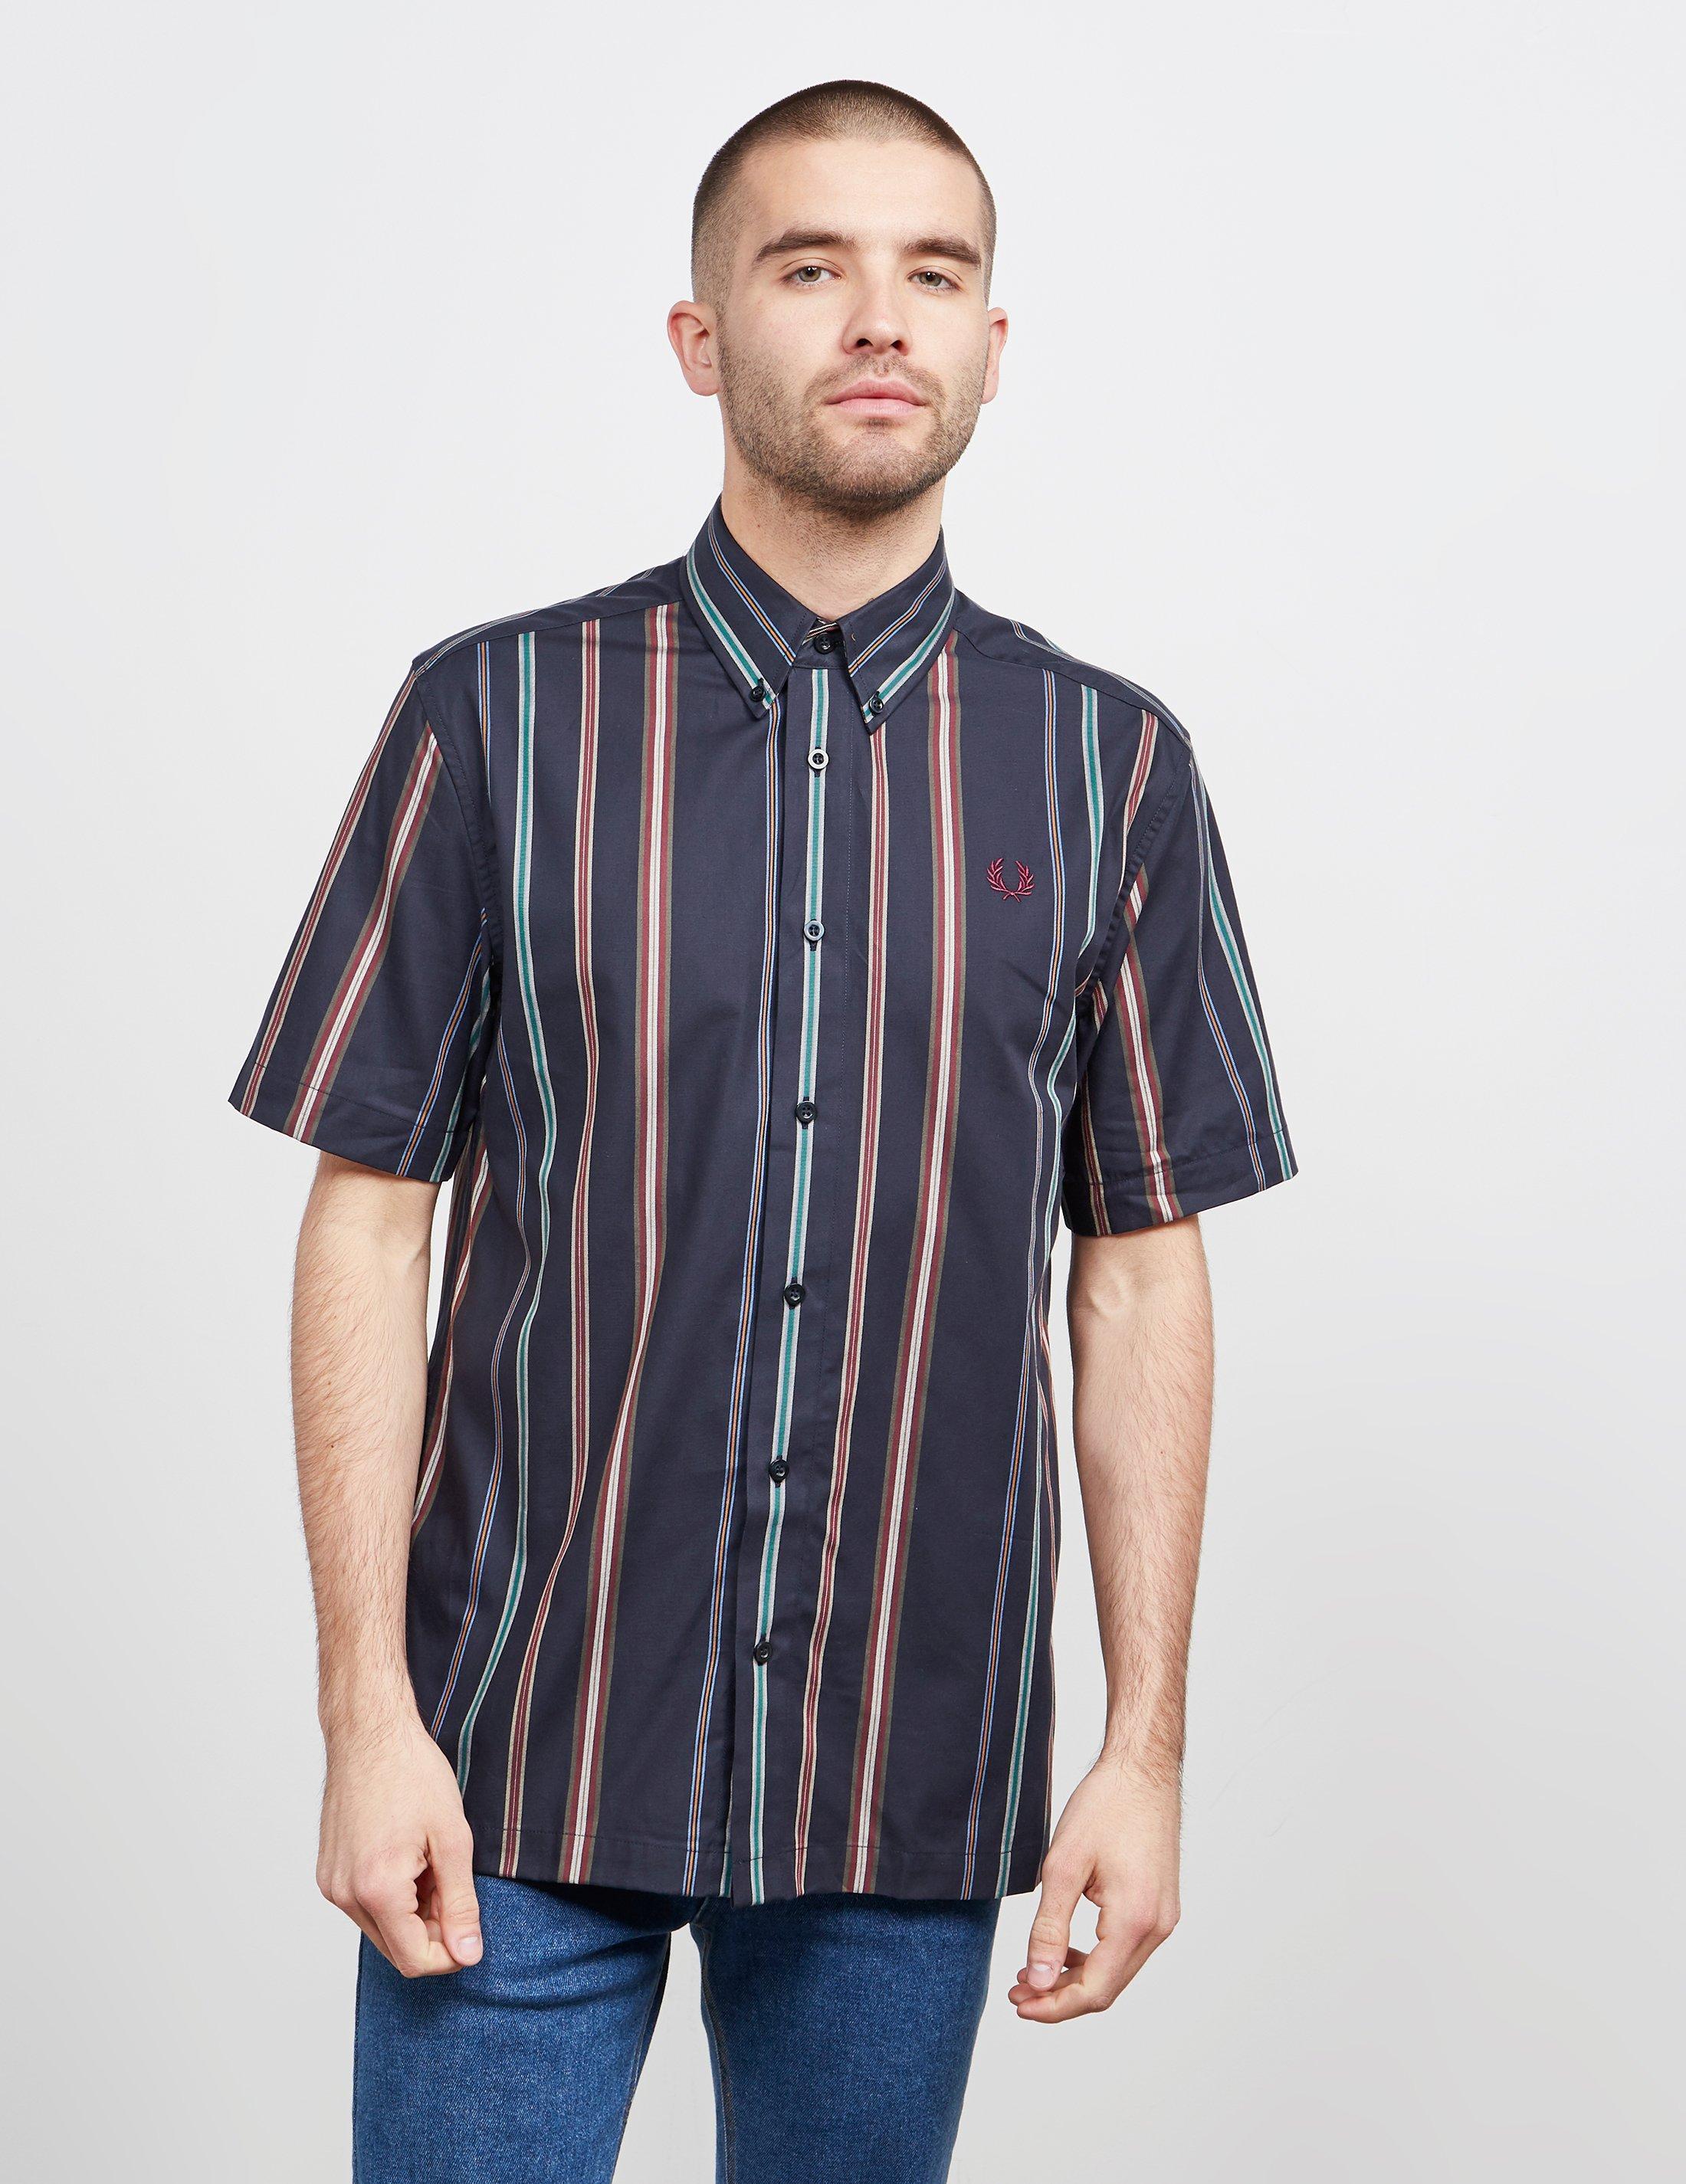 Fred Perry Cotton Stripe Short Sleeve Shirt Navy Blue for Men - Lyst